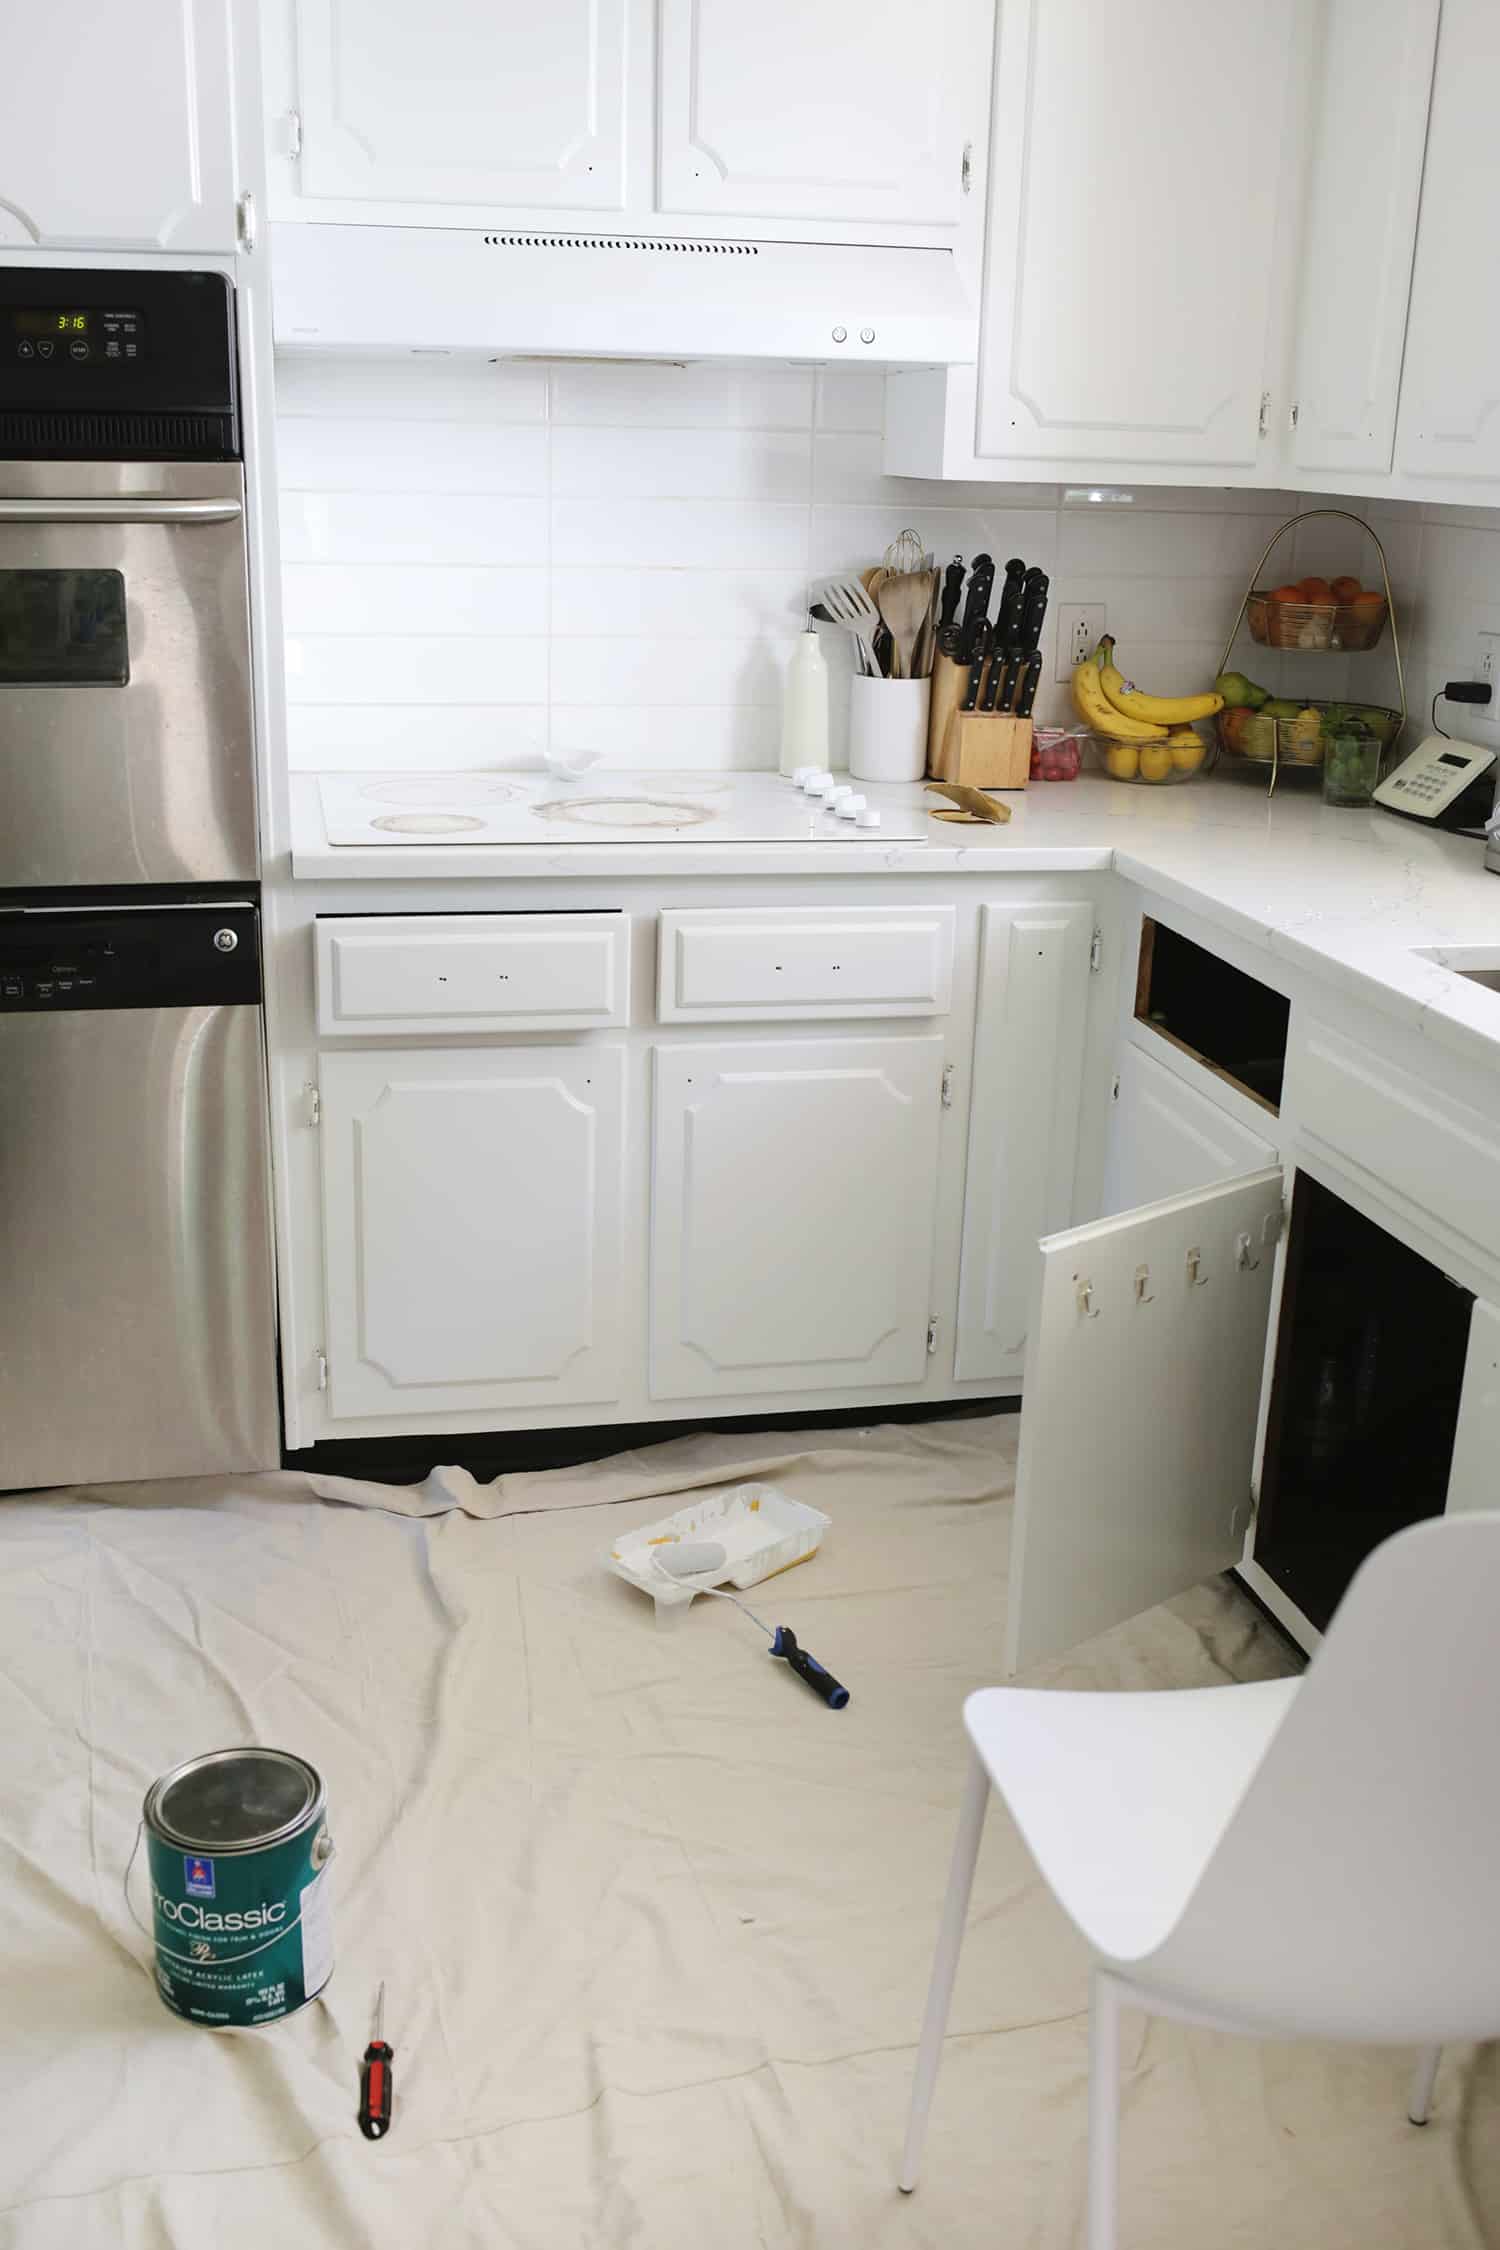 white kitchen without handles on cupboards and drawers missing with one cupboard door open